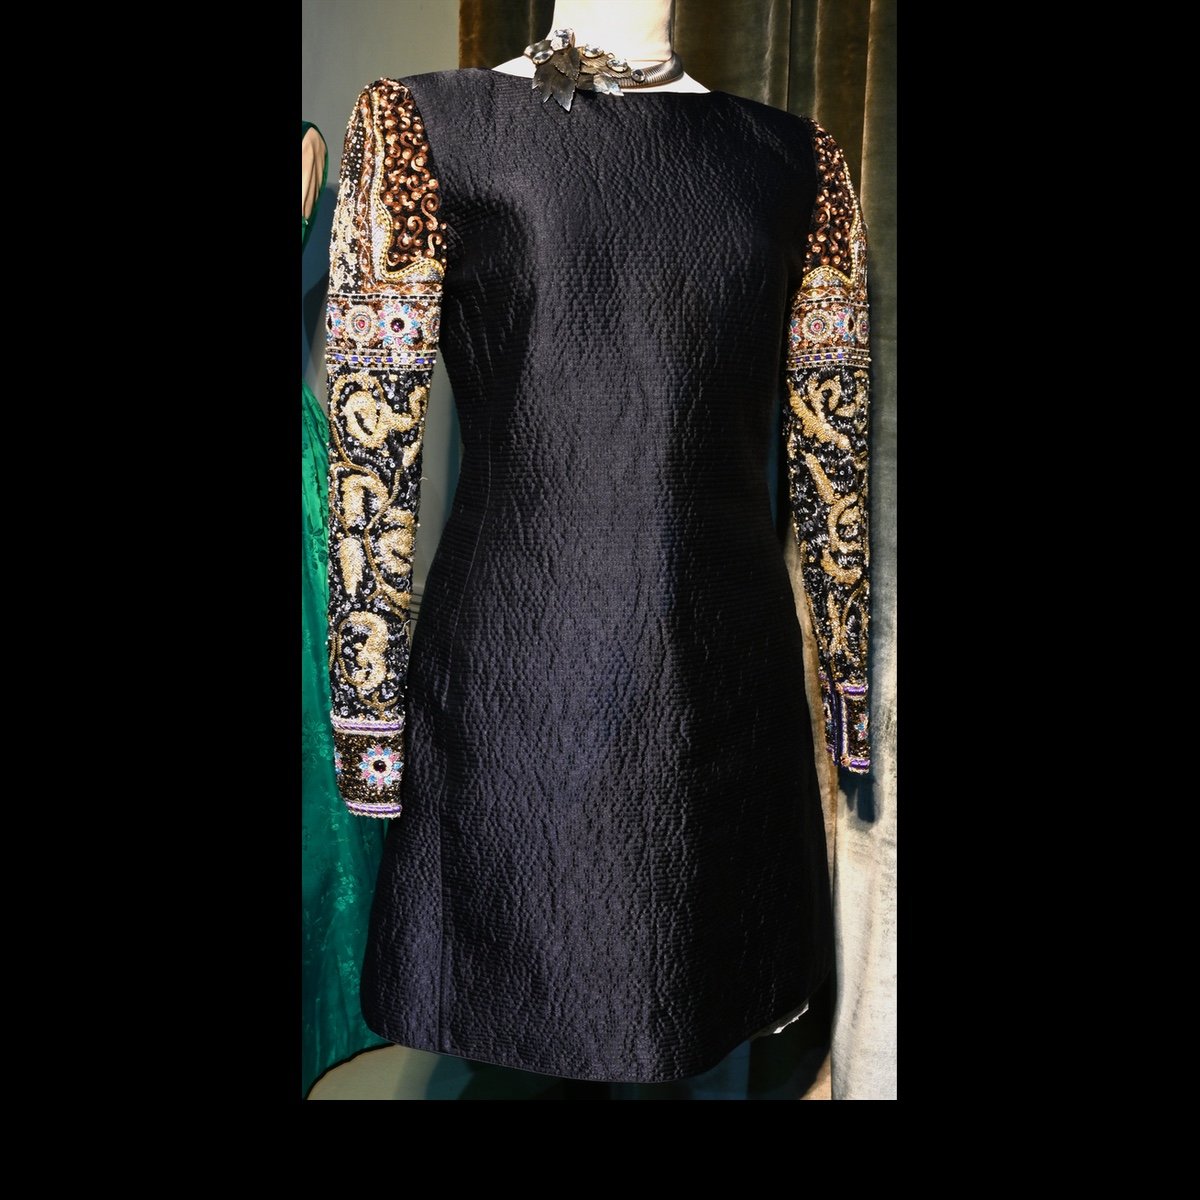 c.1980 Black cocktail dress with beaded and sequinned sleeves